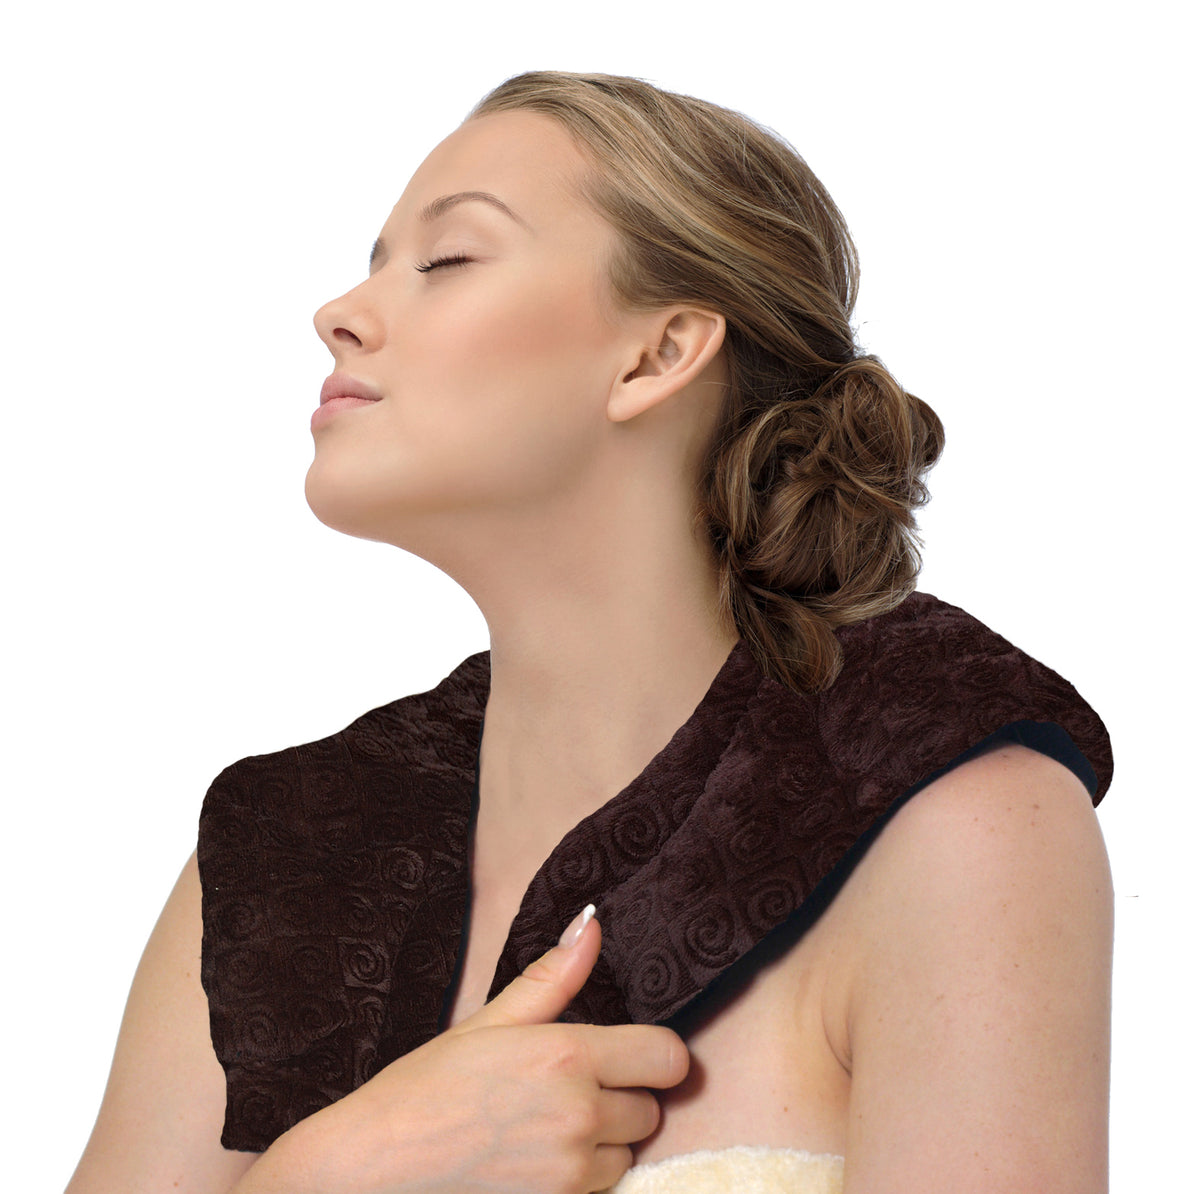 Ultra Shoulder Wrap with Aromatherapy